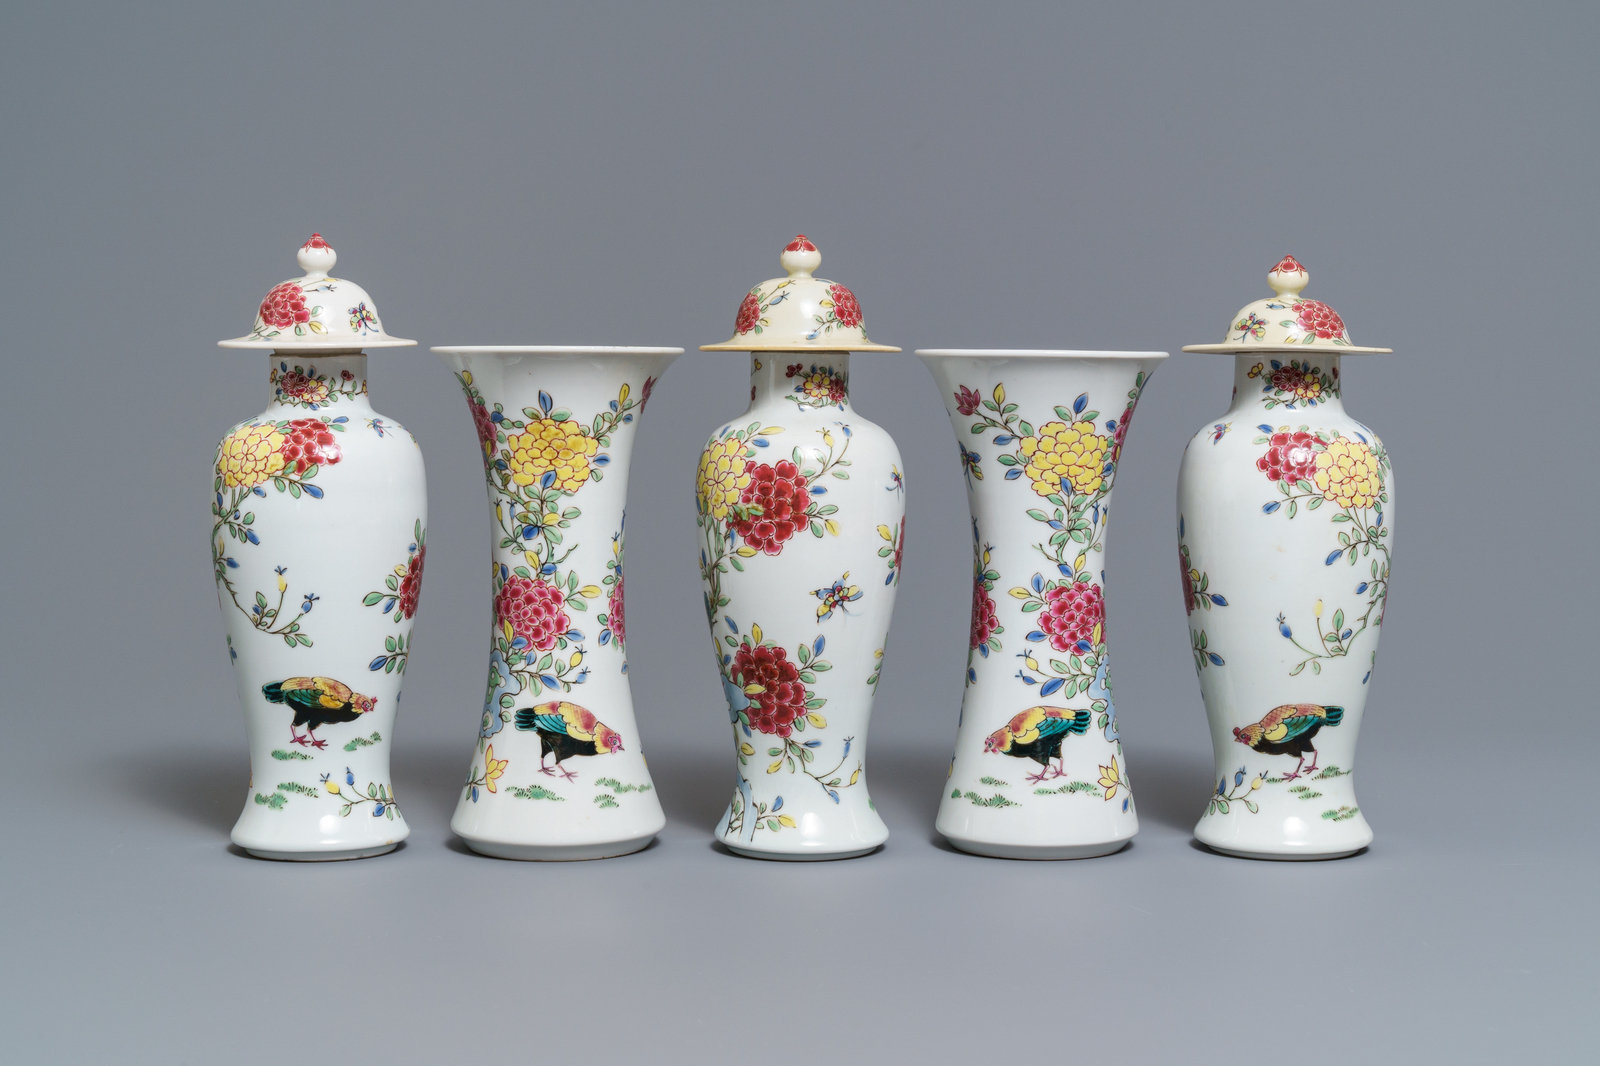 A famille rose-style five-piece garniture with roosters and chickens, Samson, Paris, 19th C. - Image 3 of 6